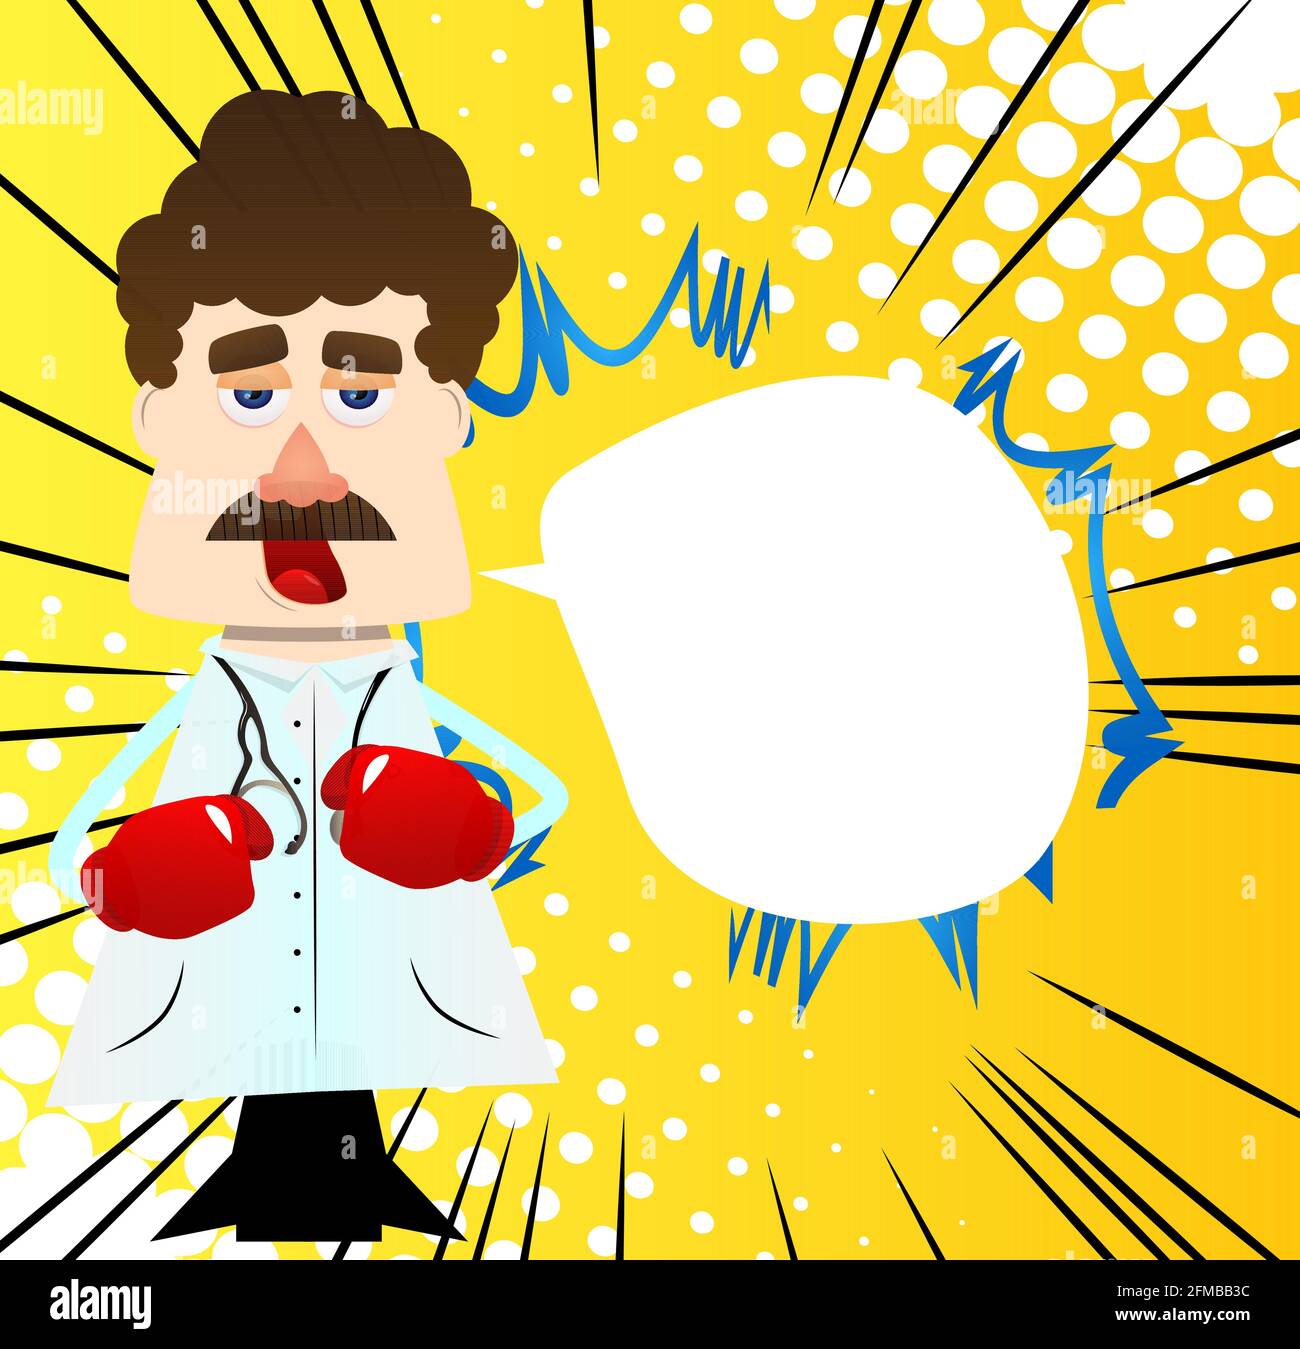 Funny cartoon doctor holding his fists in front of him ready to fight wearing boxing gloves. Vector illustration. Stock Vector